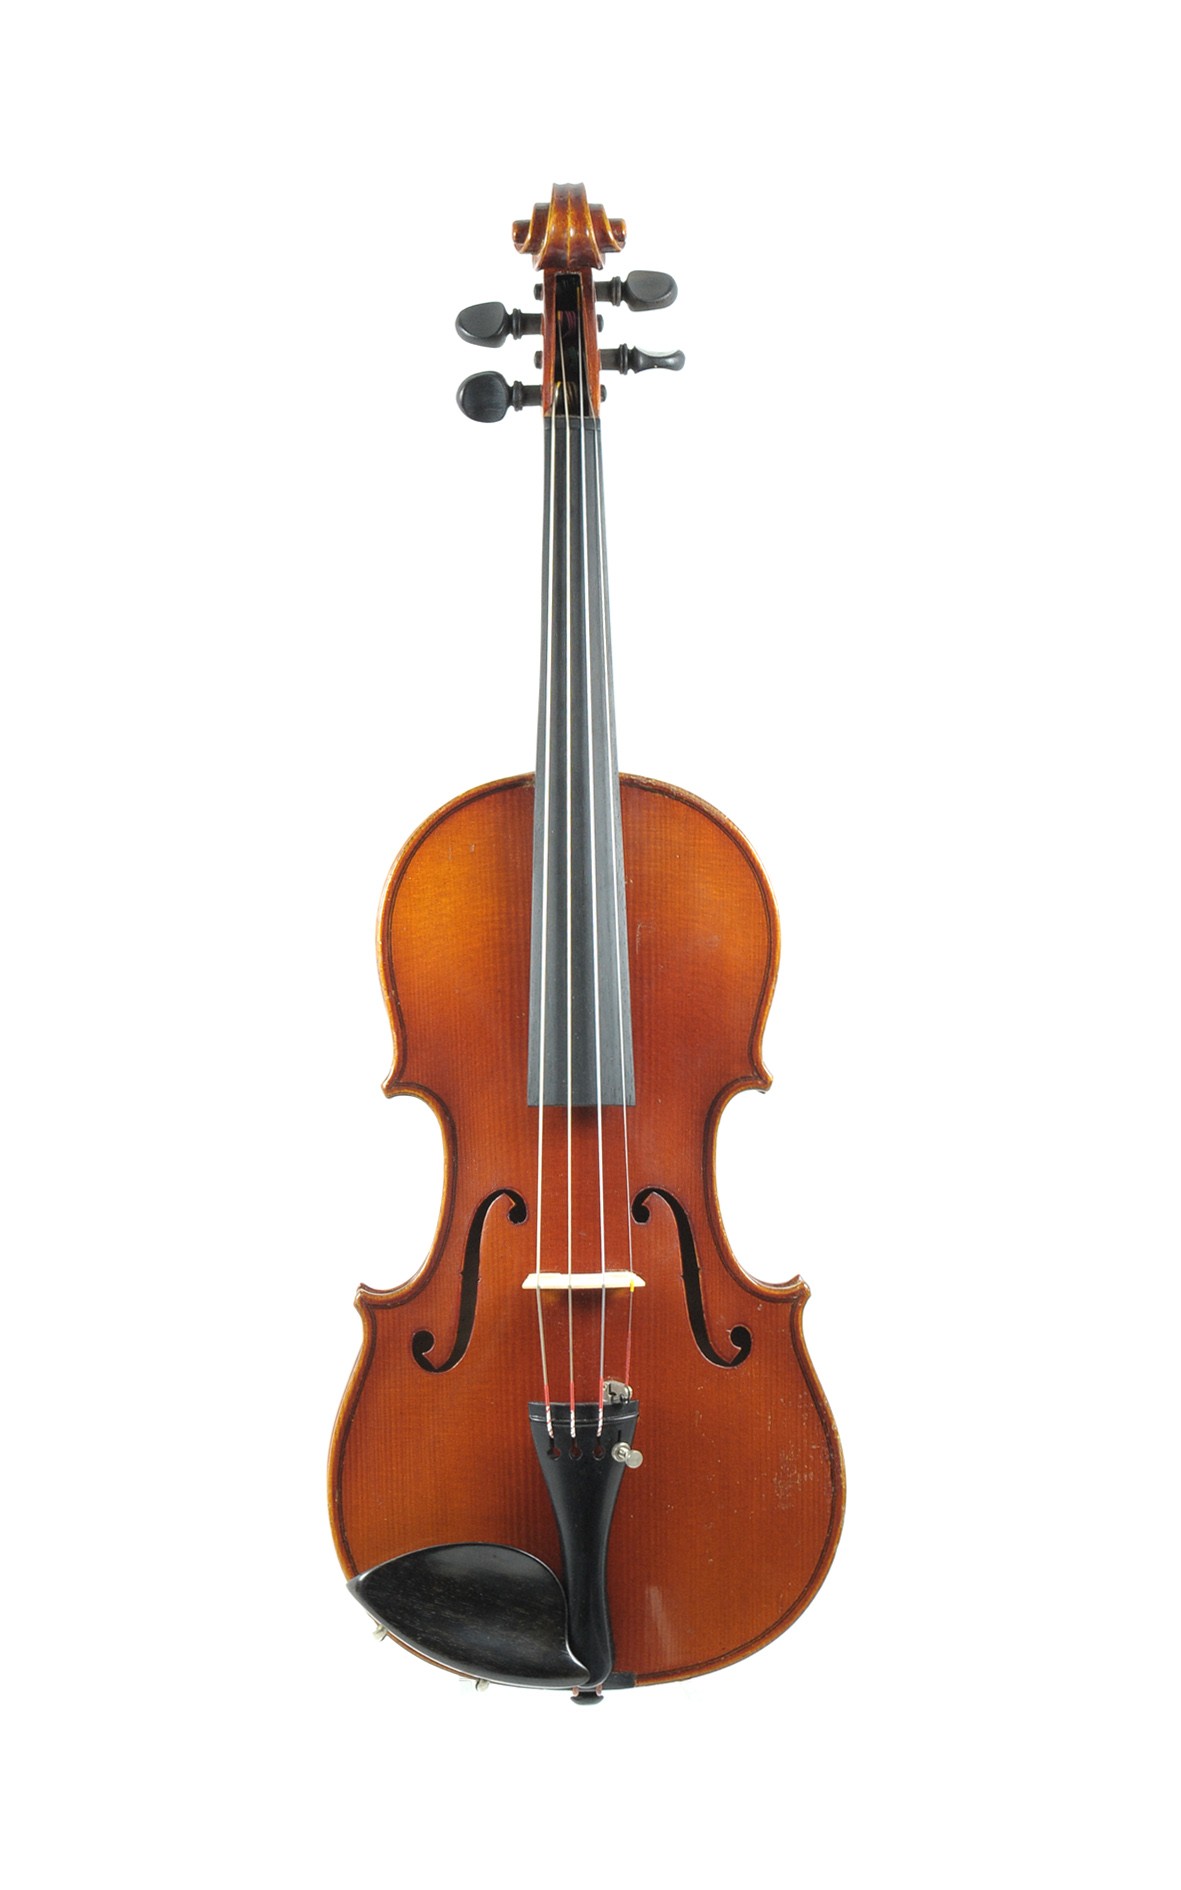 Top of a 1/2 size Bohemian violin